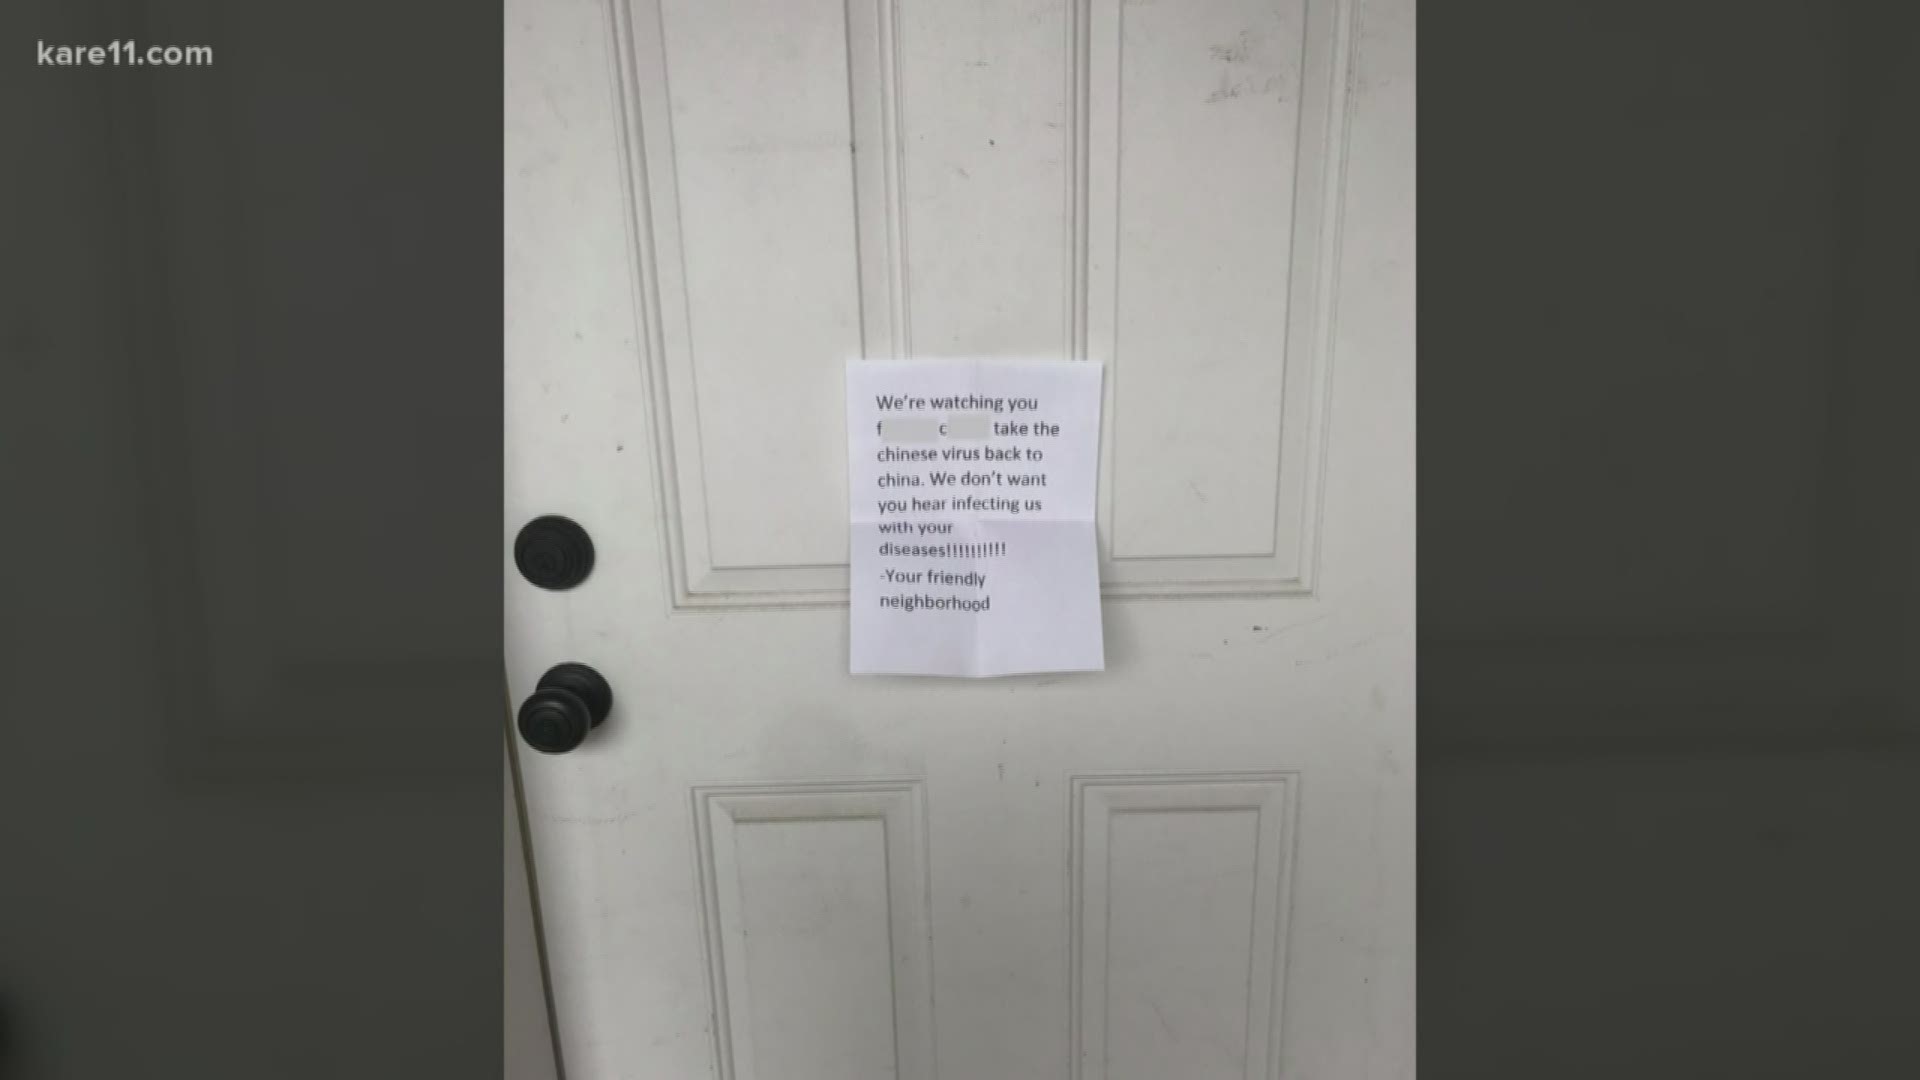 A Woodbury couple says they're shaken up after receiving a hateful note on their front door.